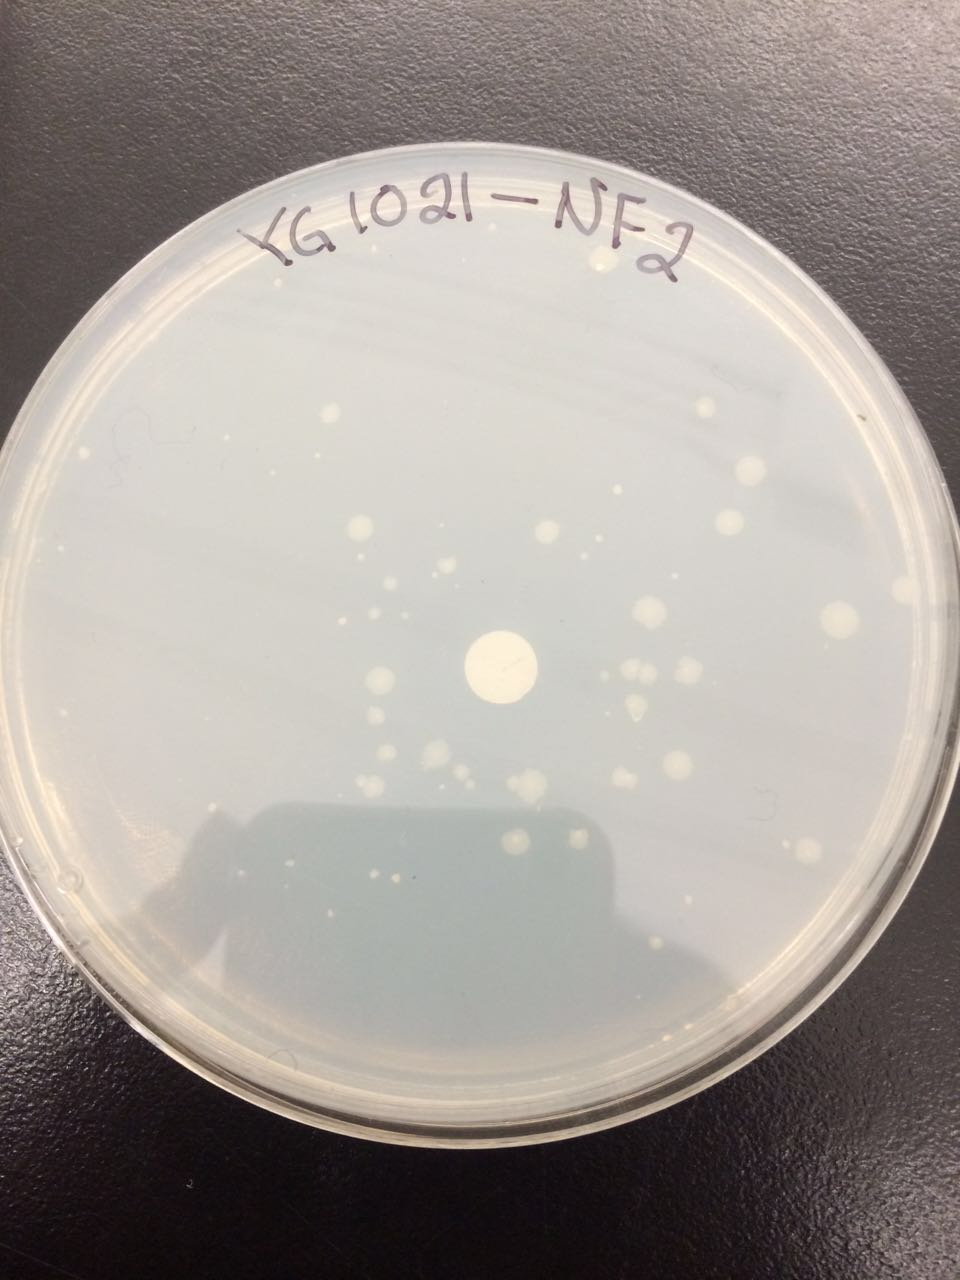 The plate with the Salmonella strain YG 1021 and its reaction with nitrofurazone